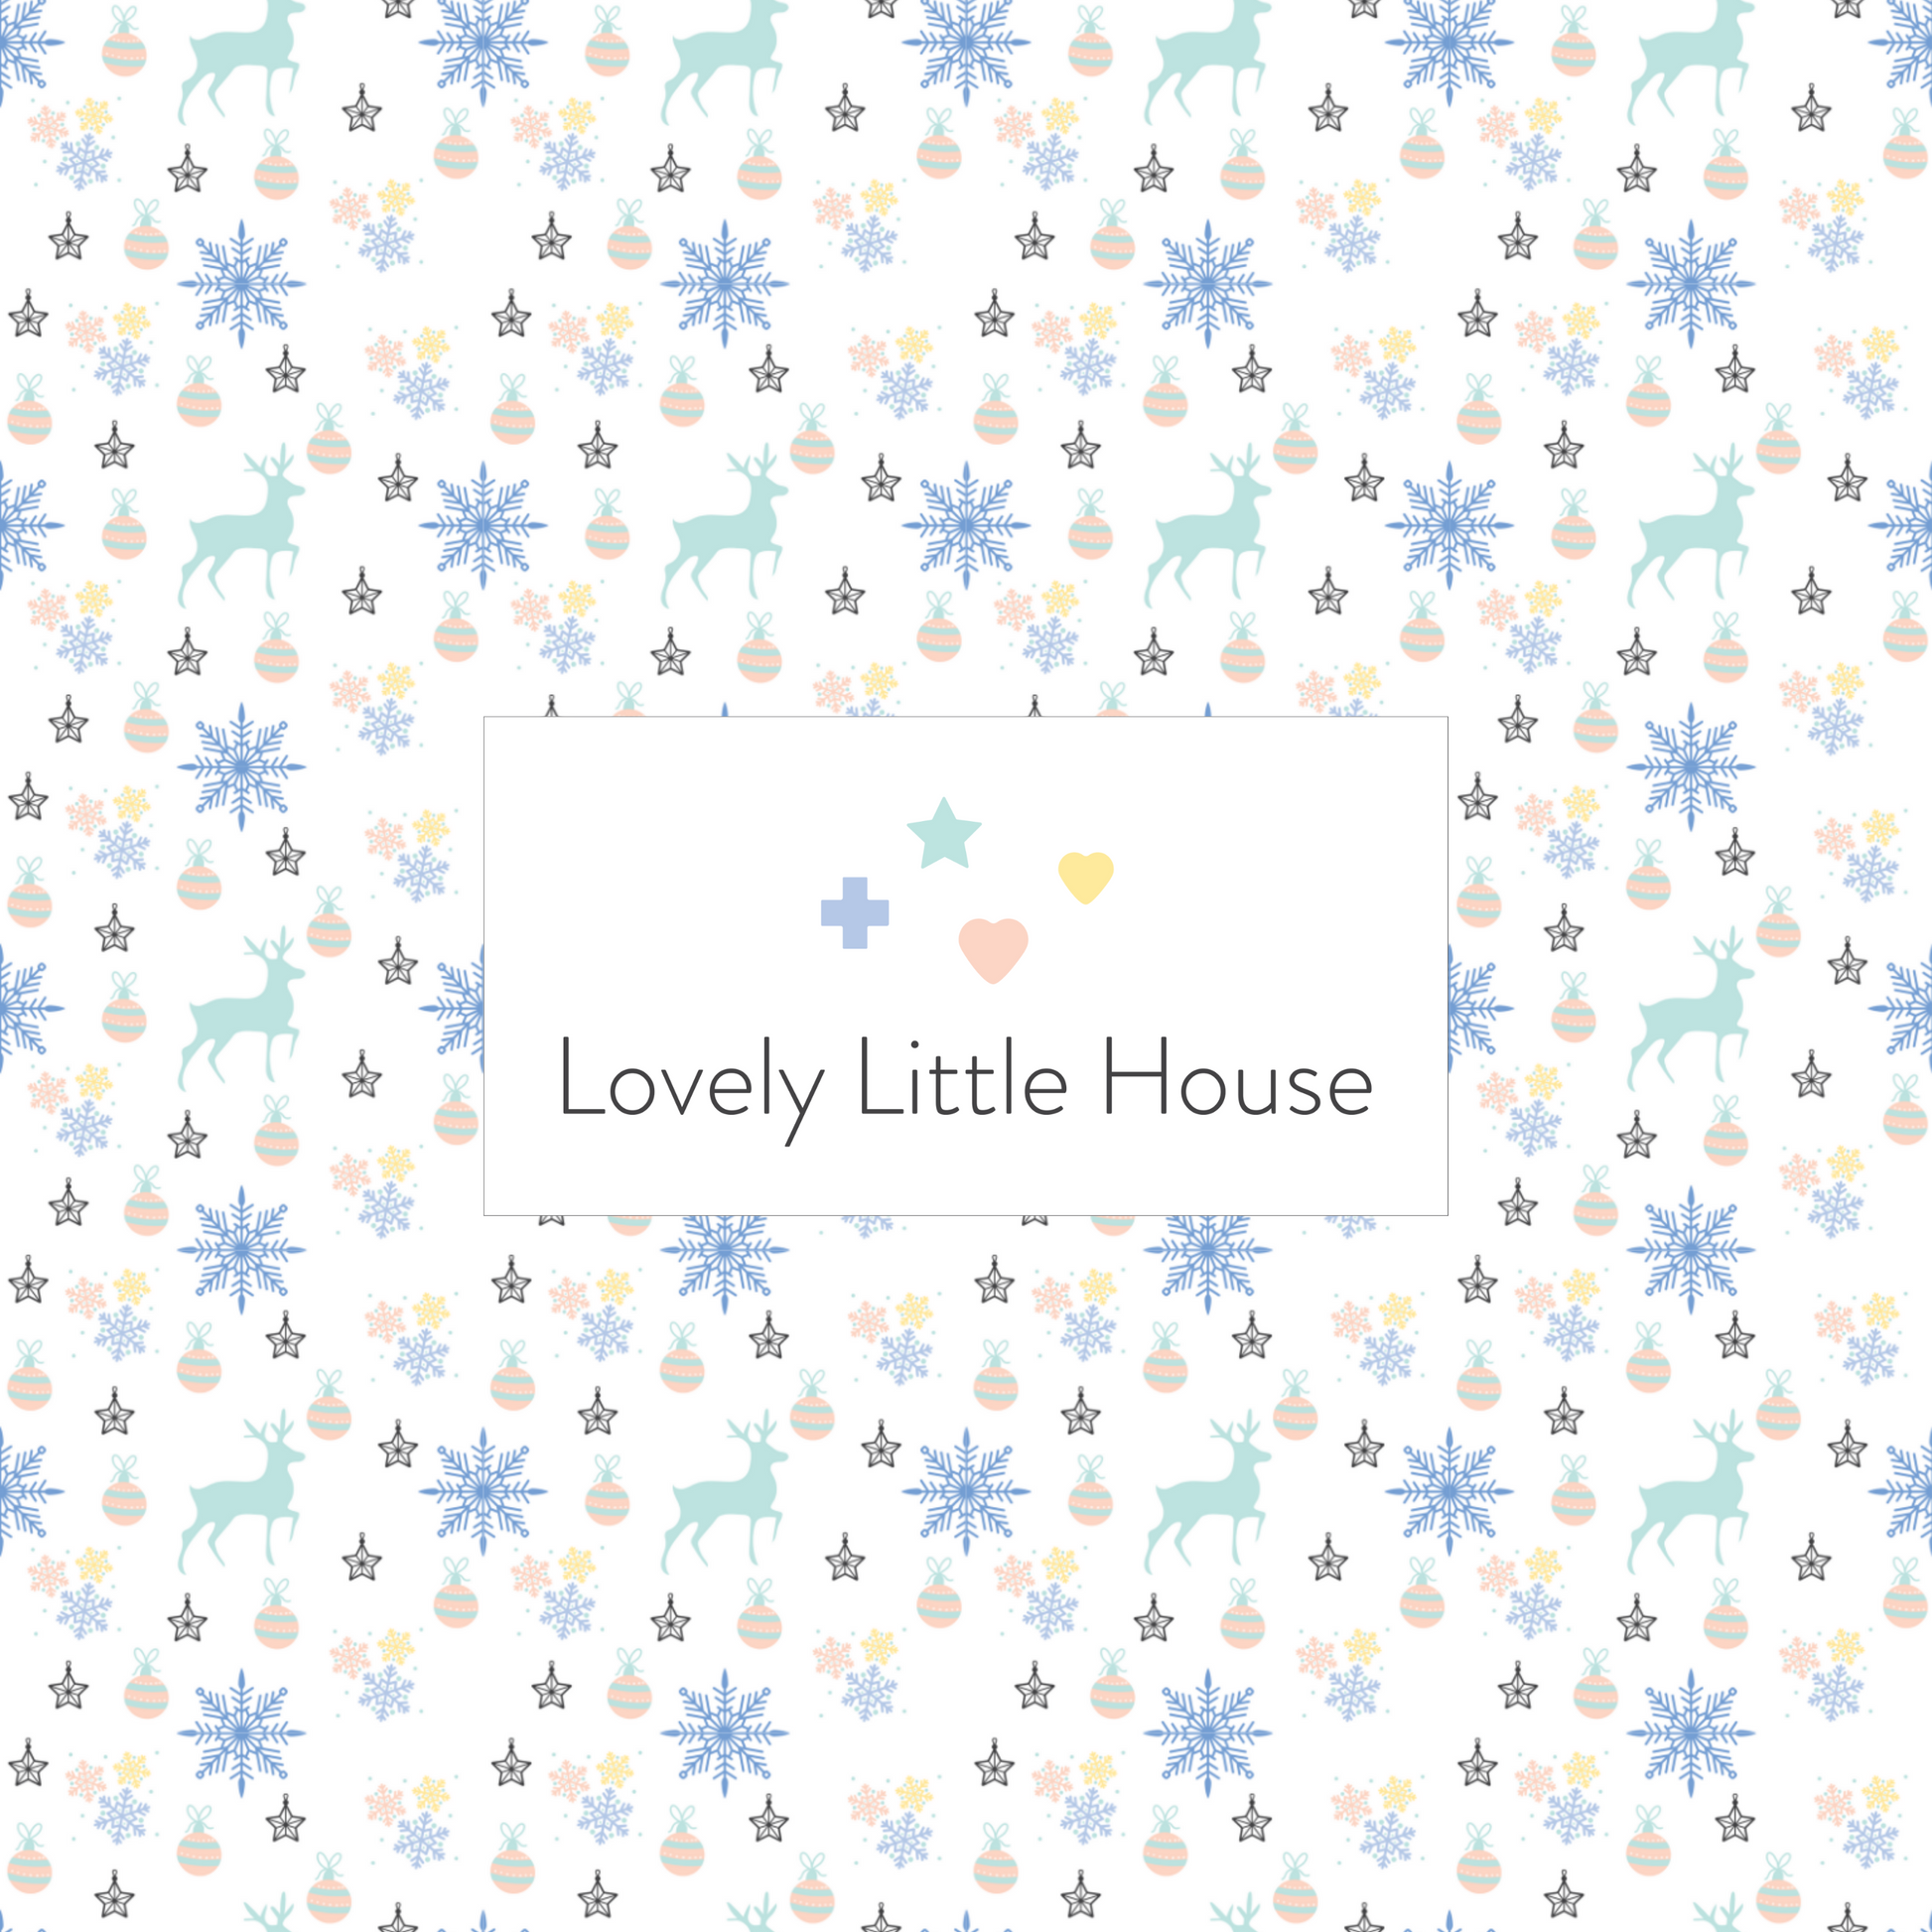 A dollhouse wallpaper pattern of snowflakes, Christmas ornaments, and deer